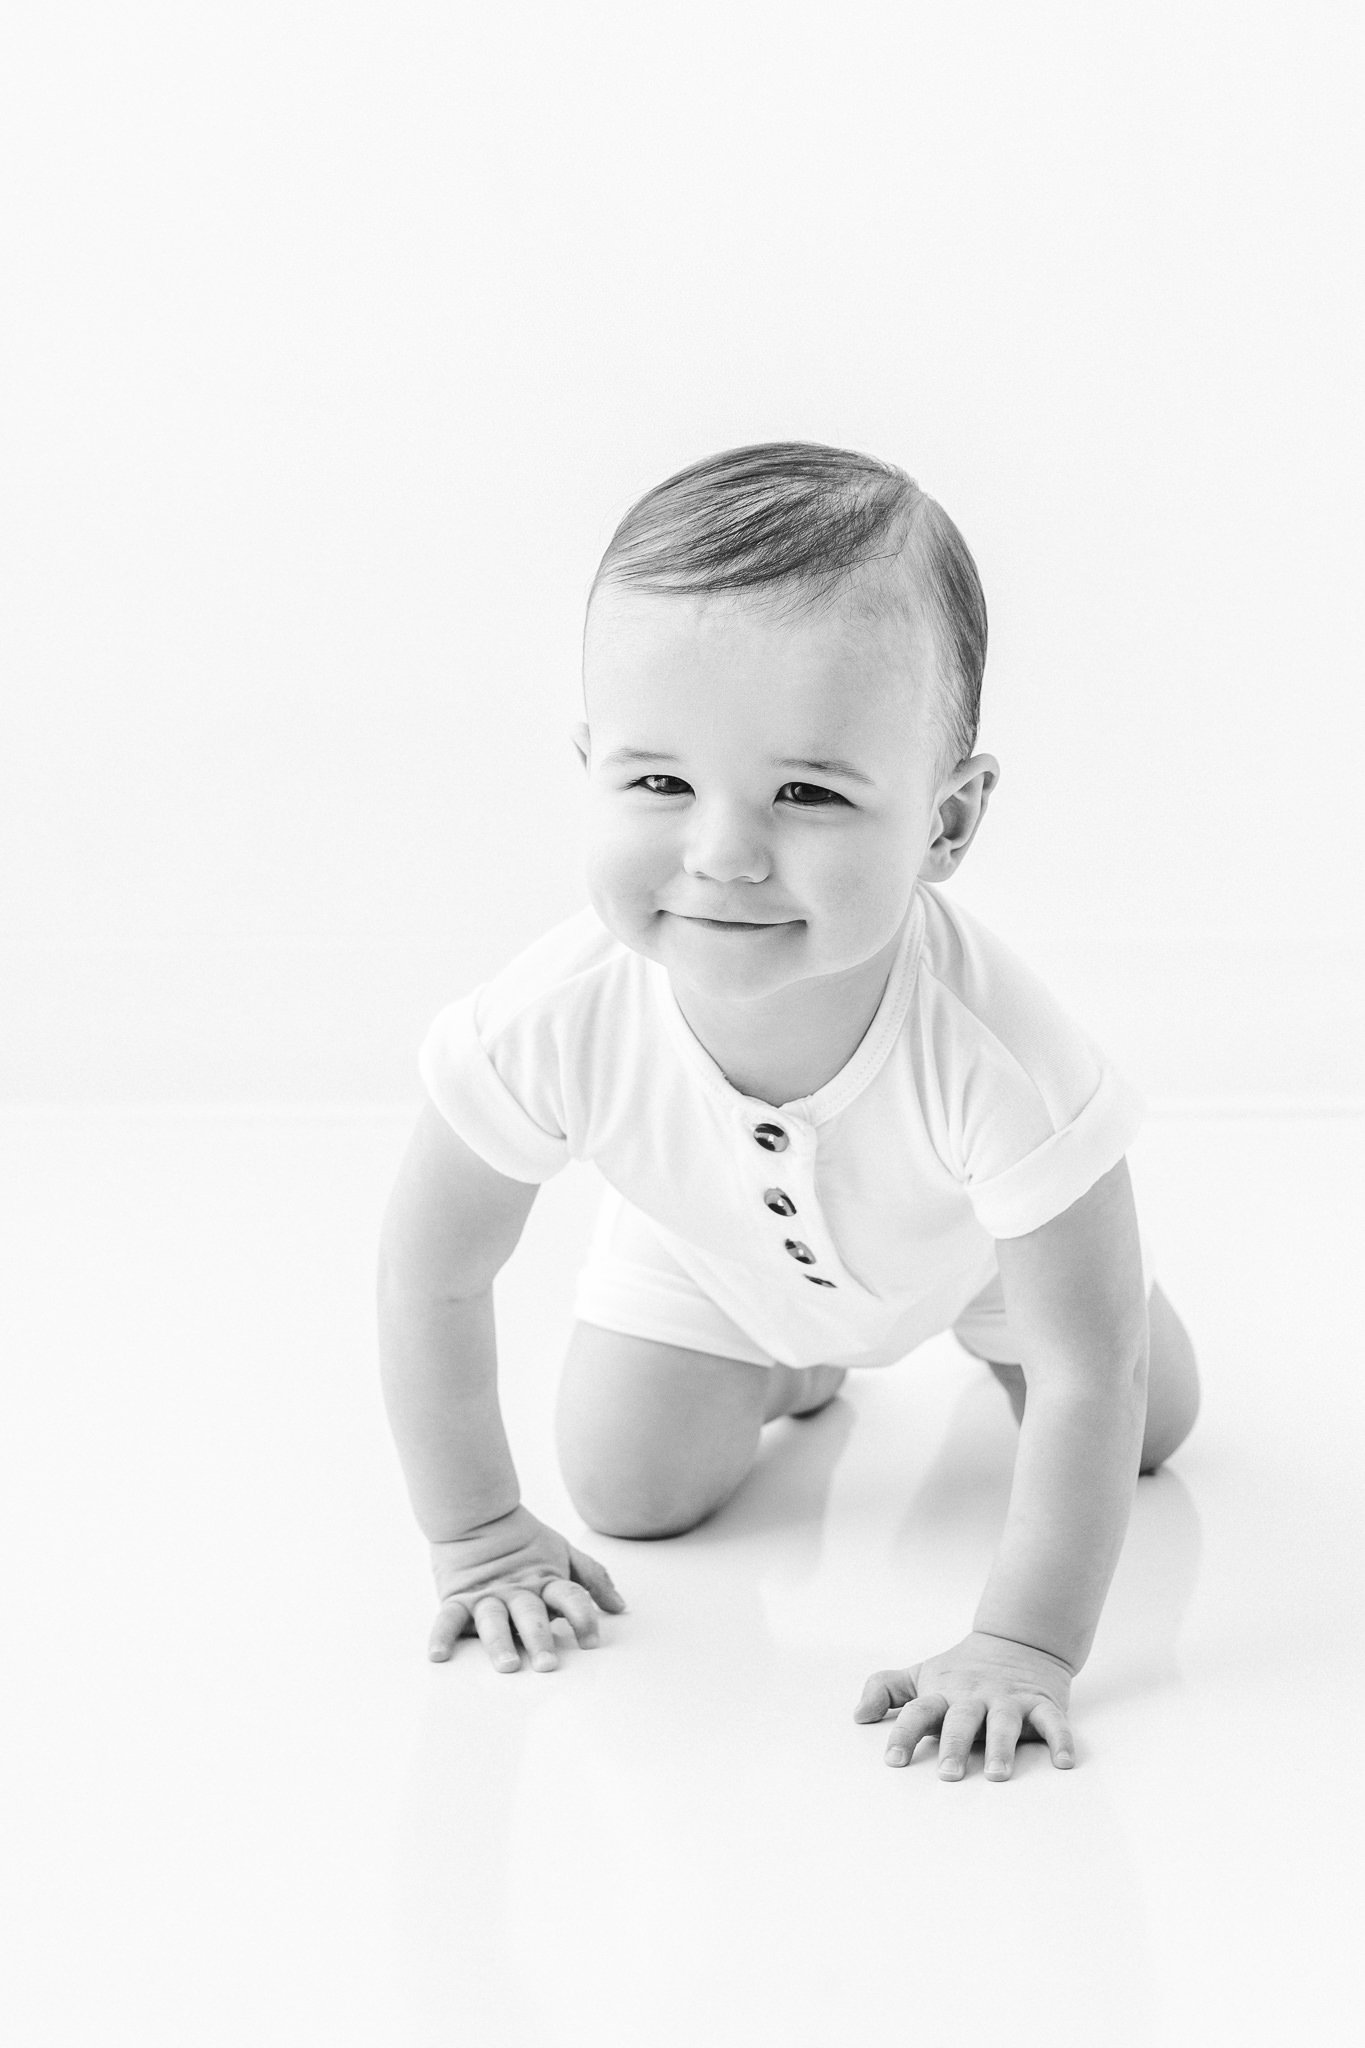  Baby boy crawling around in a white studio in New Jersey by Nicole Hawkins Photography. smiling crawling one year old baby birthday portraits #NicoleHawkinsPhotography #NicoleHawkinsBabies #FirstBirthdayPhotography #StudioFamilyPortraits #NJBabies #